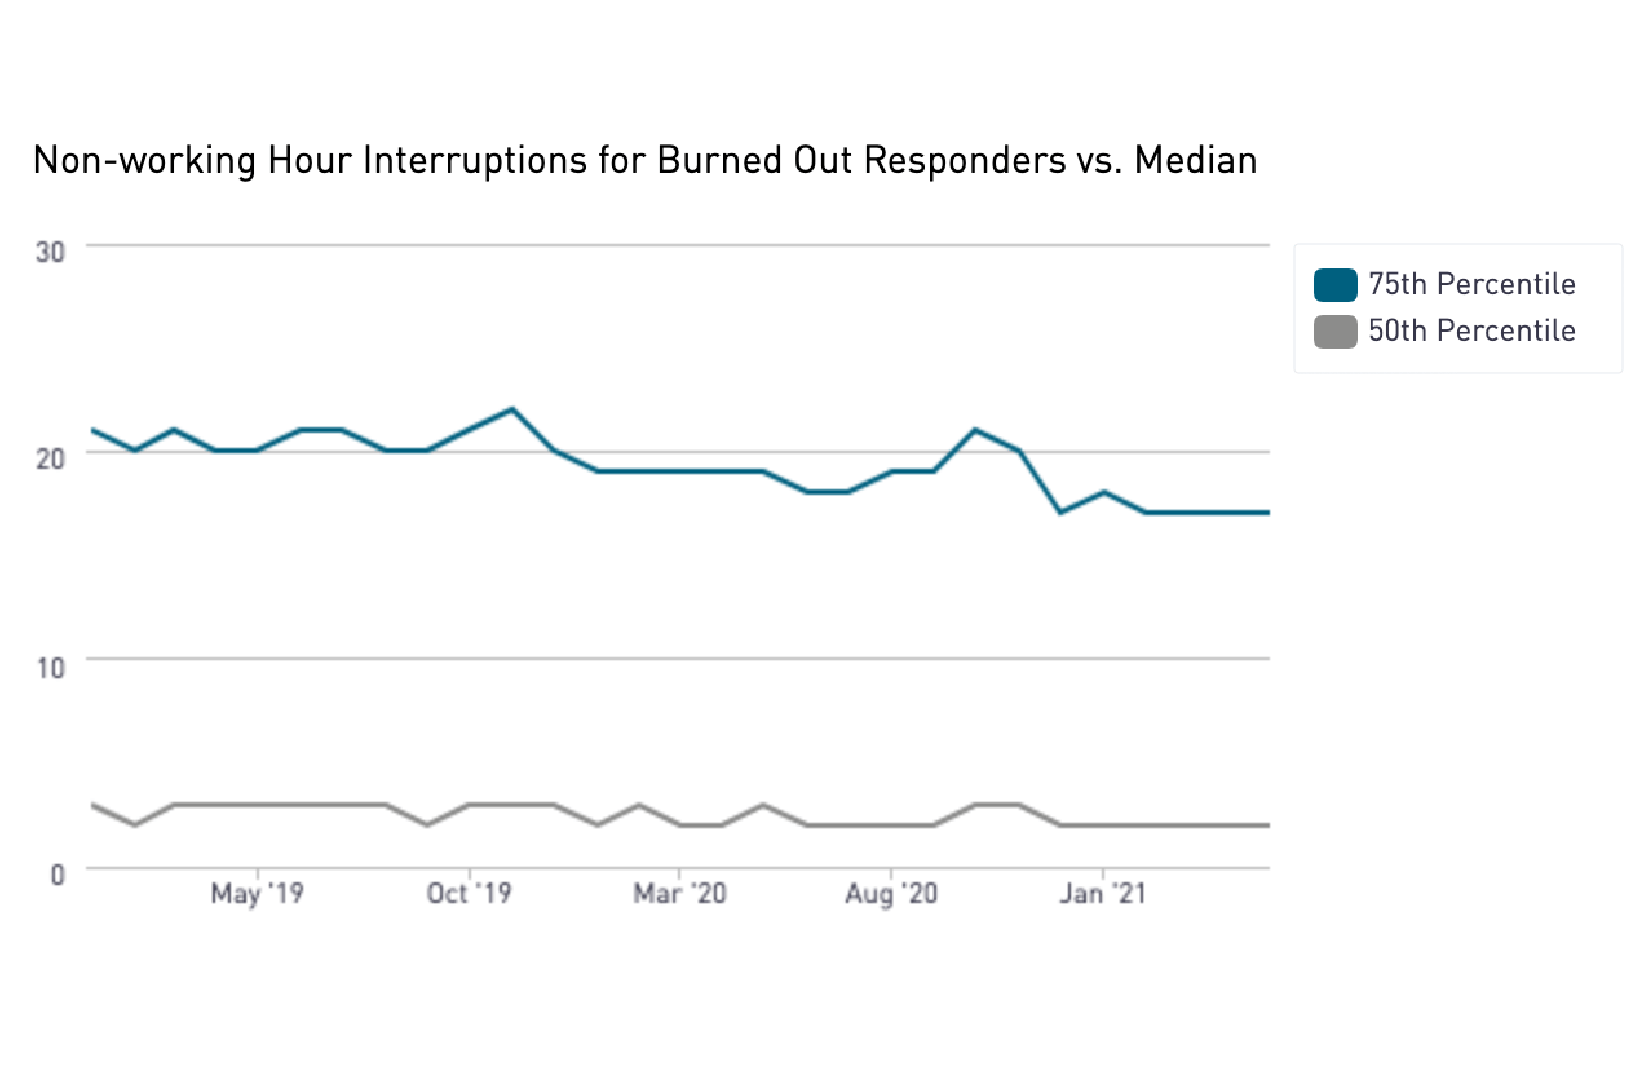 Chart 6: Non-working Hour Interruptions for Burned Out Responders vs. Median